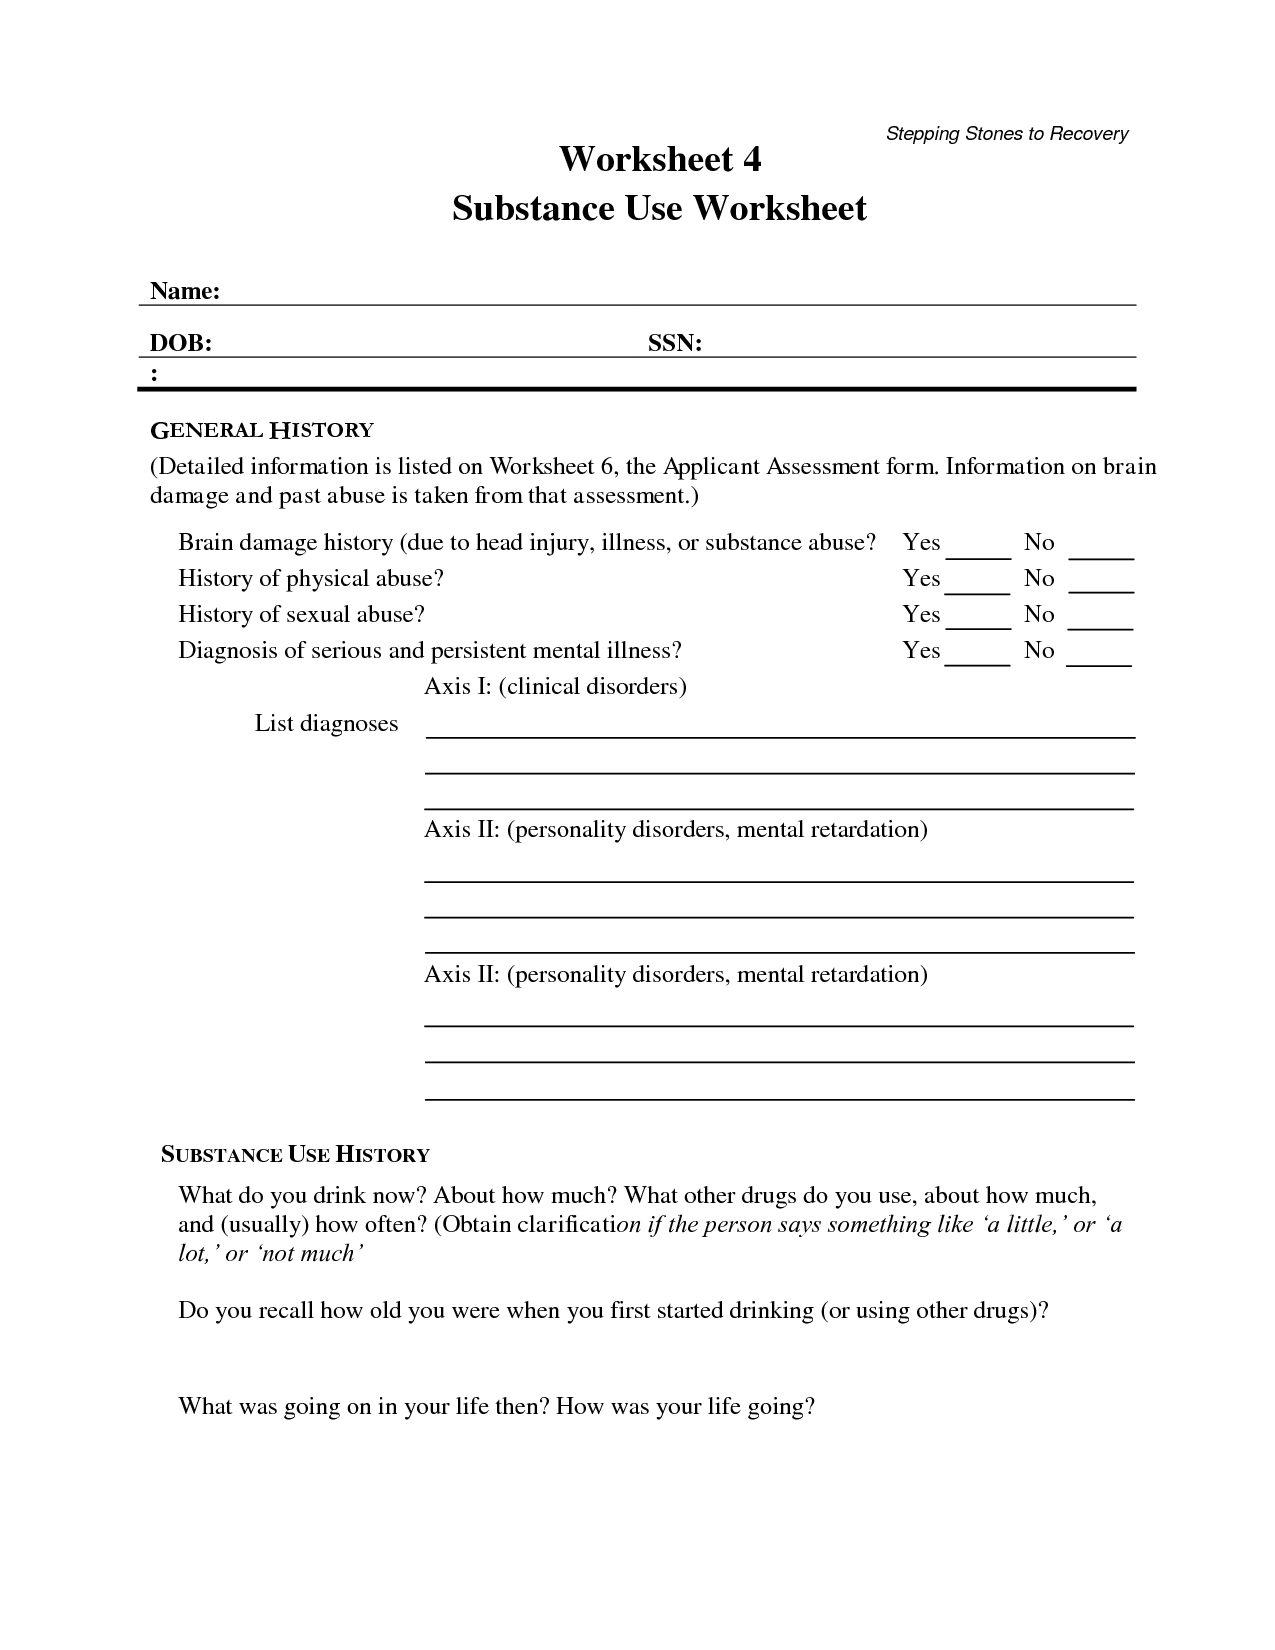 11-best-images-of-addiction-recovery-worksheets-substance-abuse